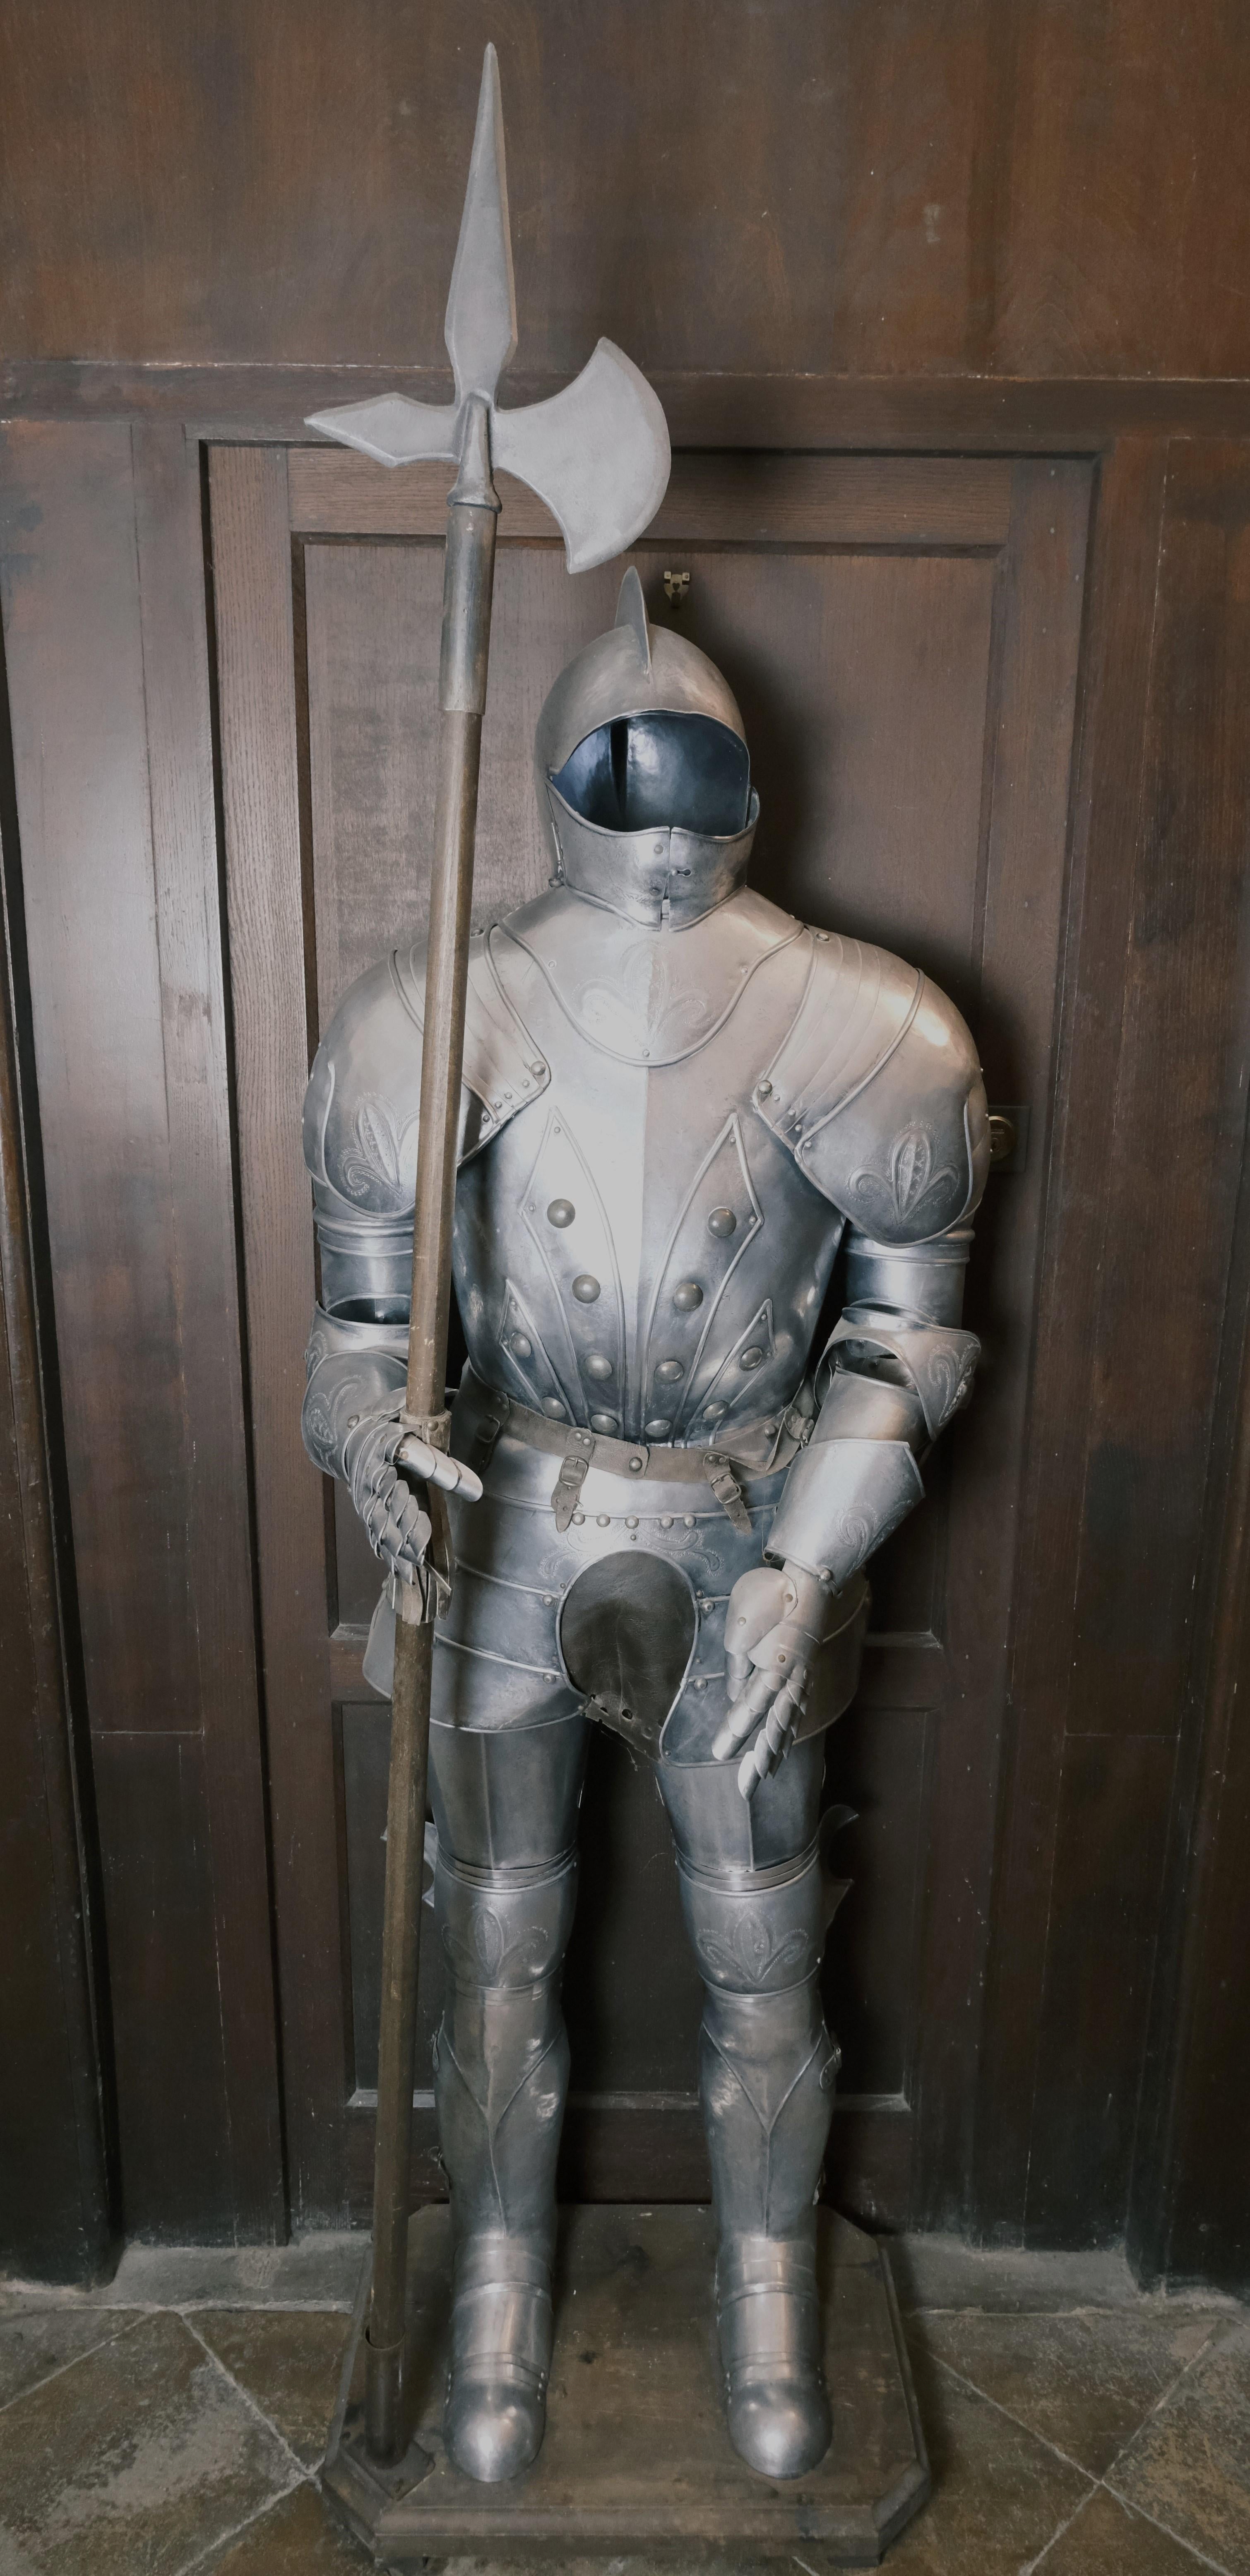 Hutton-Clarke Antiques is delighted to present a replicated Italian suit of armor crafted in the 20th century. Fashioned in the Renaissance style, this piece exhibits meticulous attention to detail, featuring ornate chased work. It stands proudly on